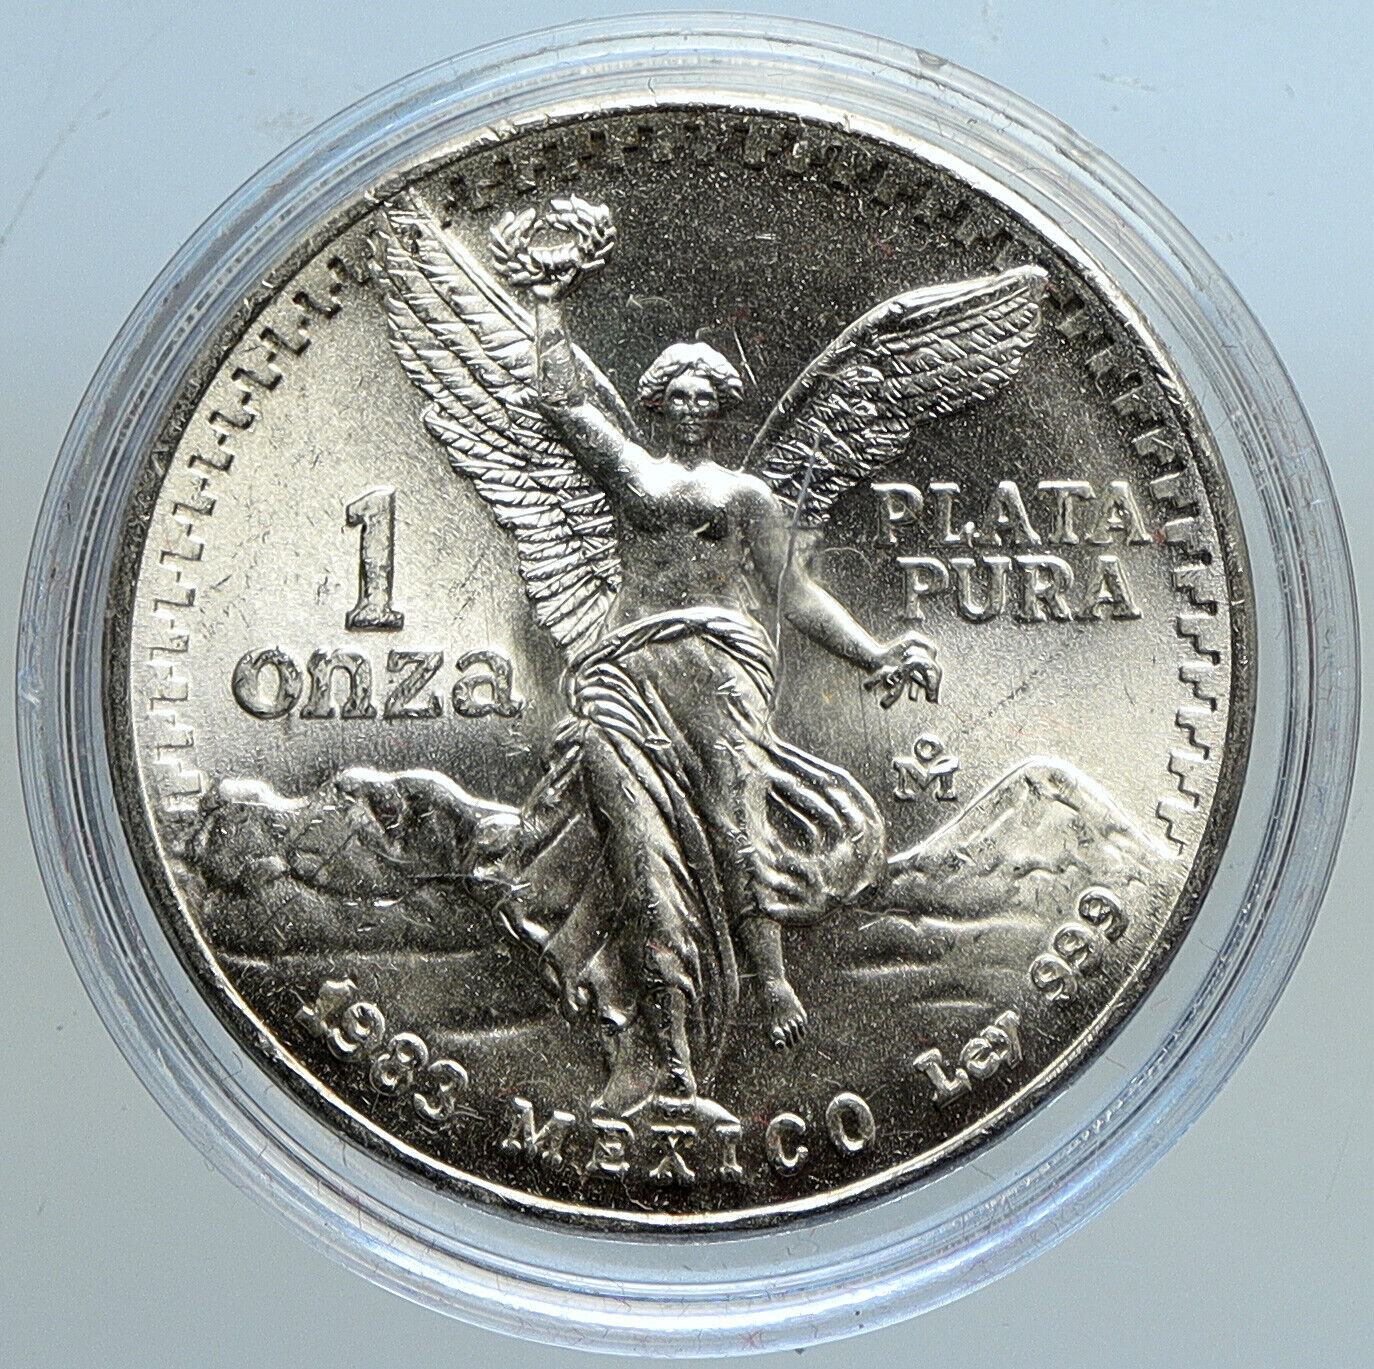 1983 MEXICO Large ONZA VICTORY EAGLE Troy OLD Silver Ounce Mexican Coin i113316